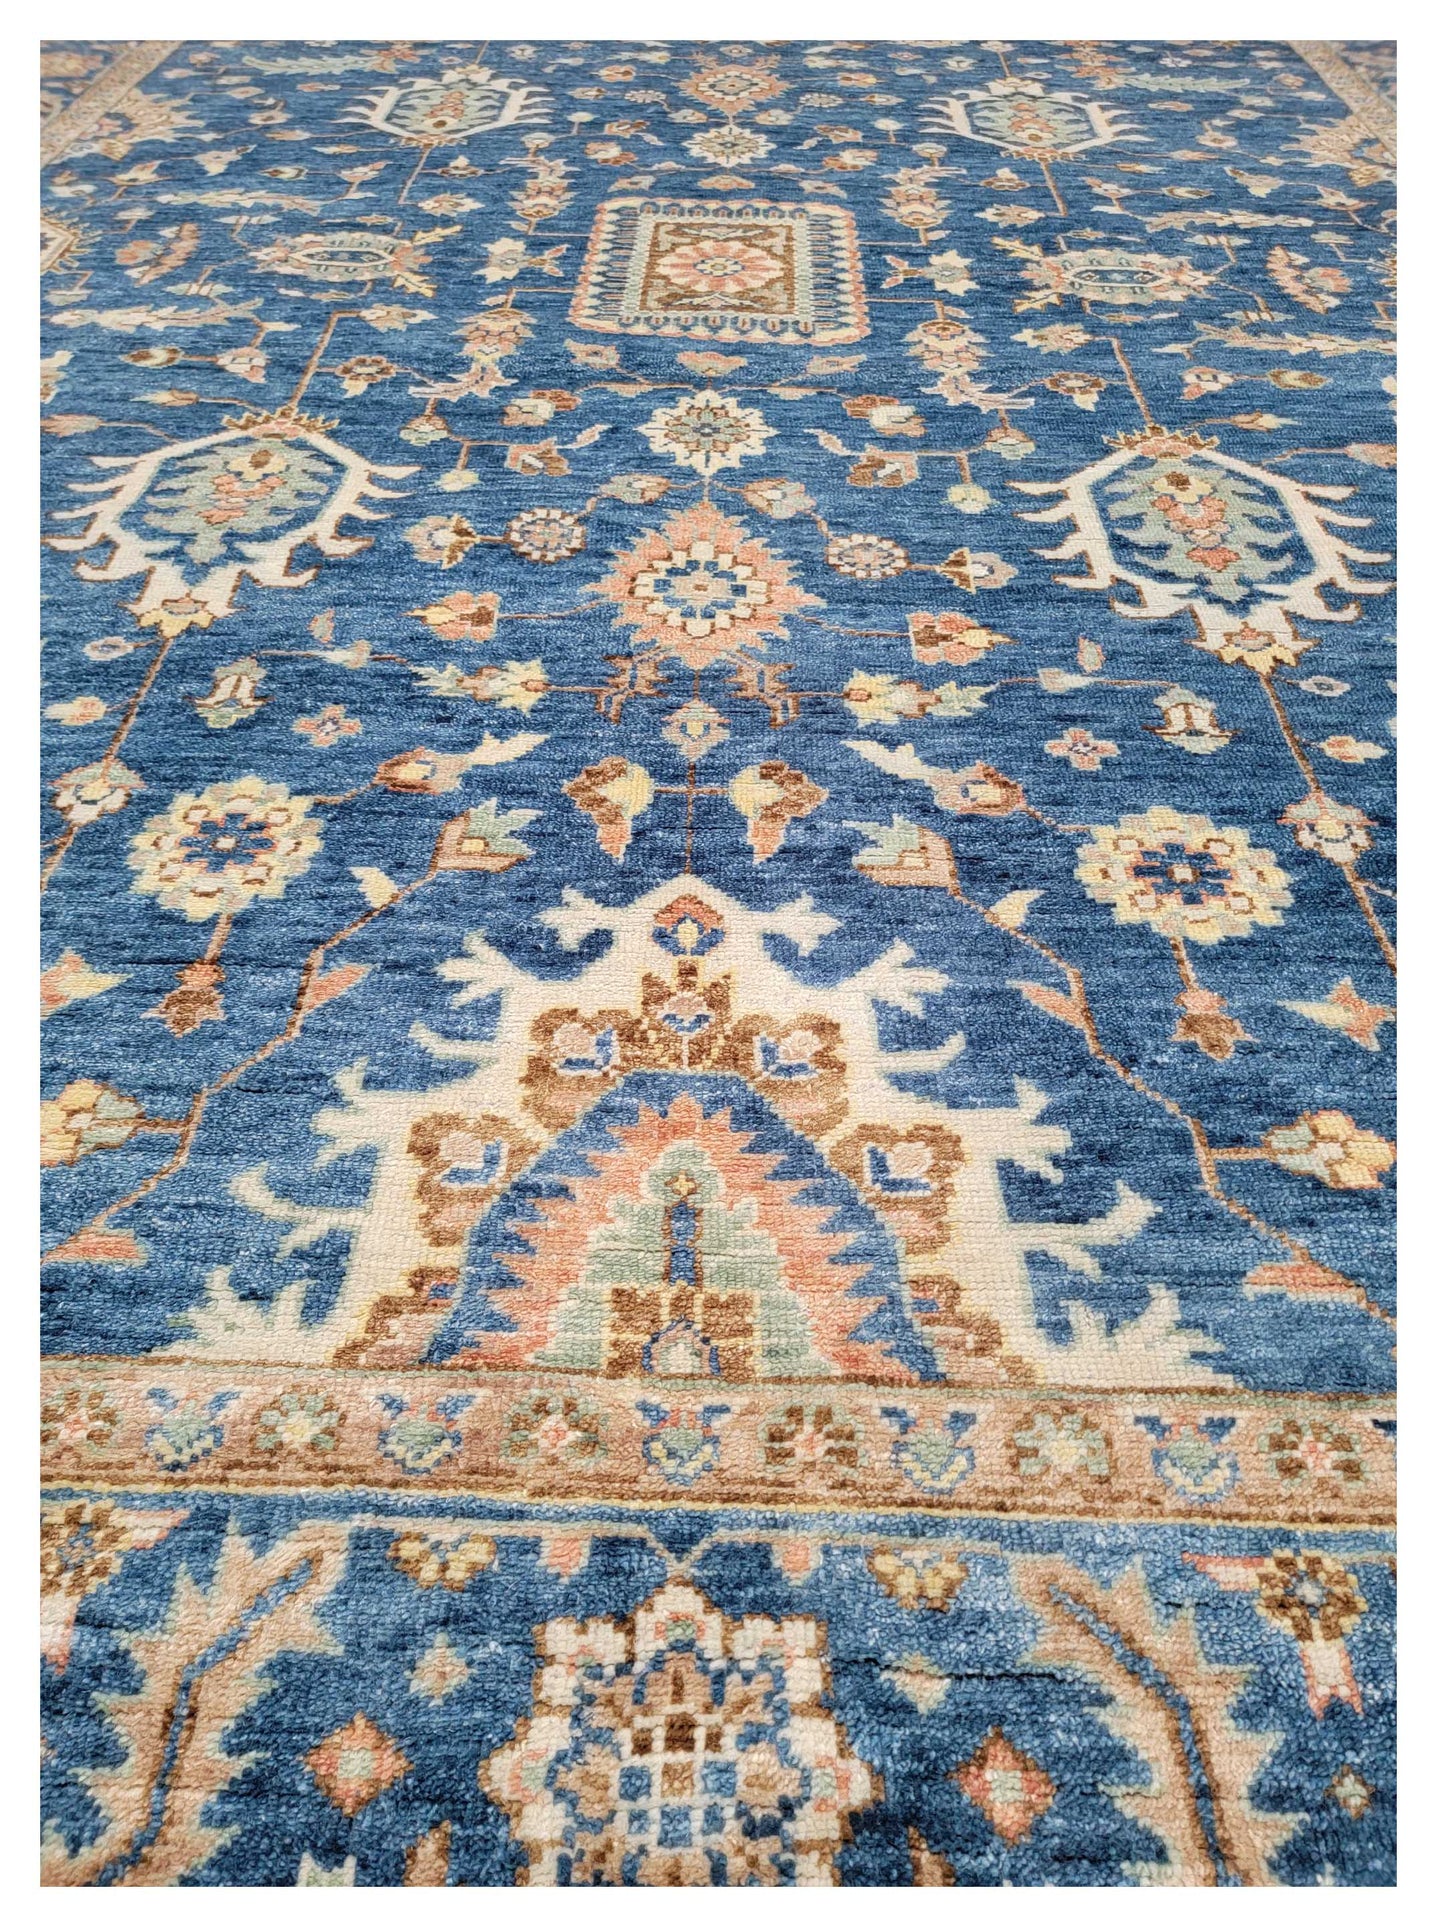 Artisan Florence  Teal Blue  Traditional Knotted Rug